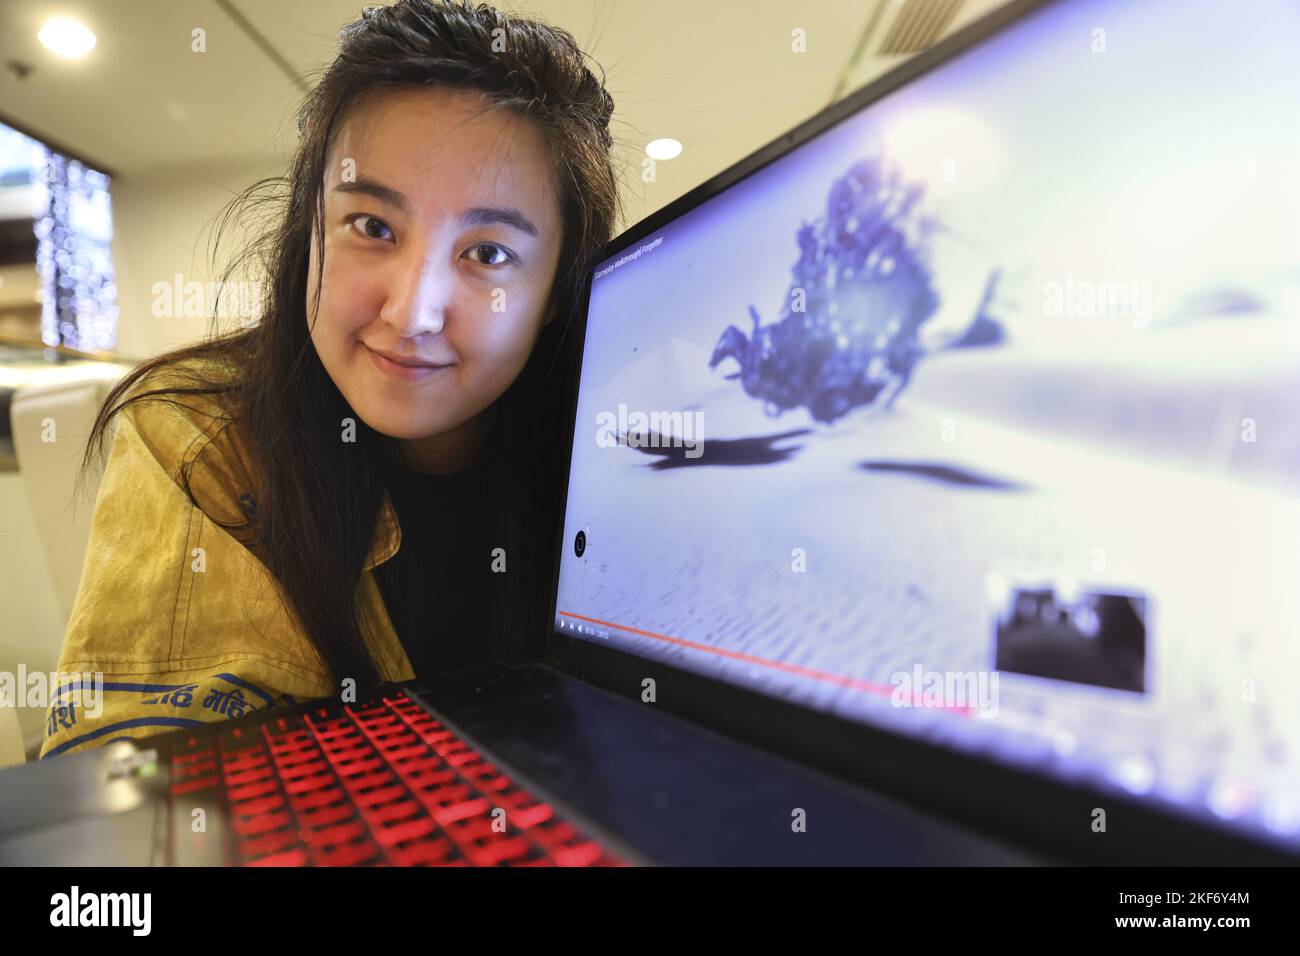 Allison Yang, a game developer, producer and curator HHamong many other hats she wears poise for a photograph  at Sha Tin.09NOV22 SCMP / K. Y. Cheng Stock Photo